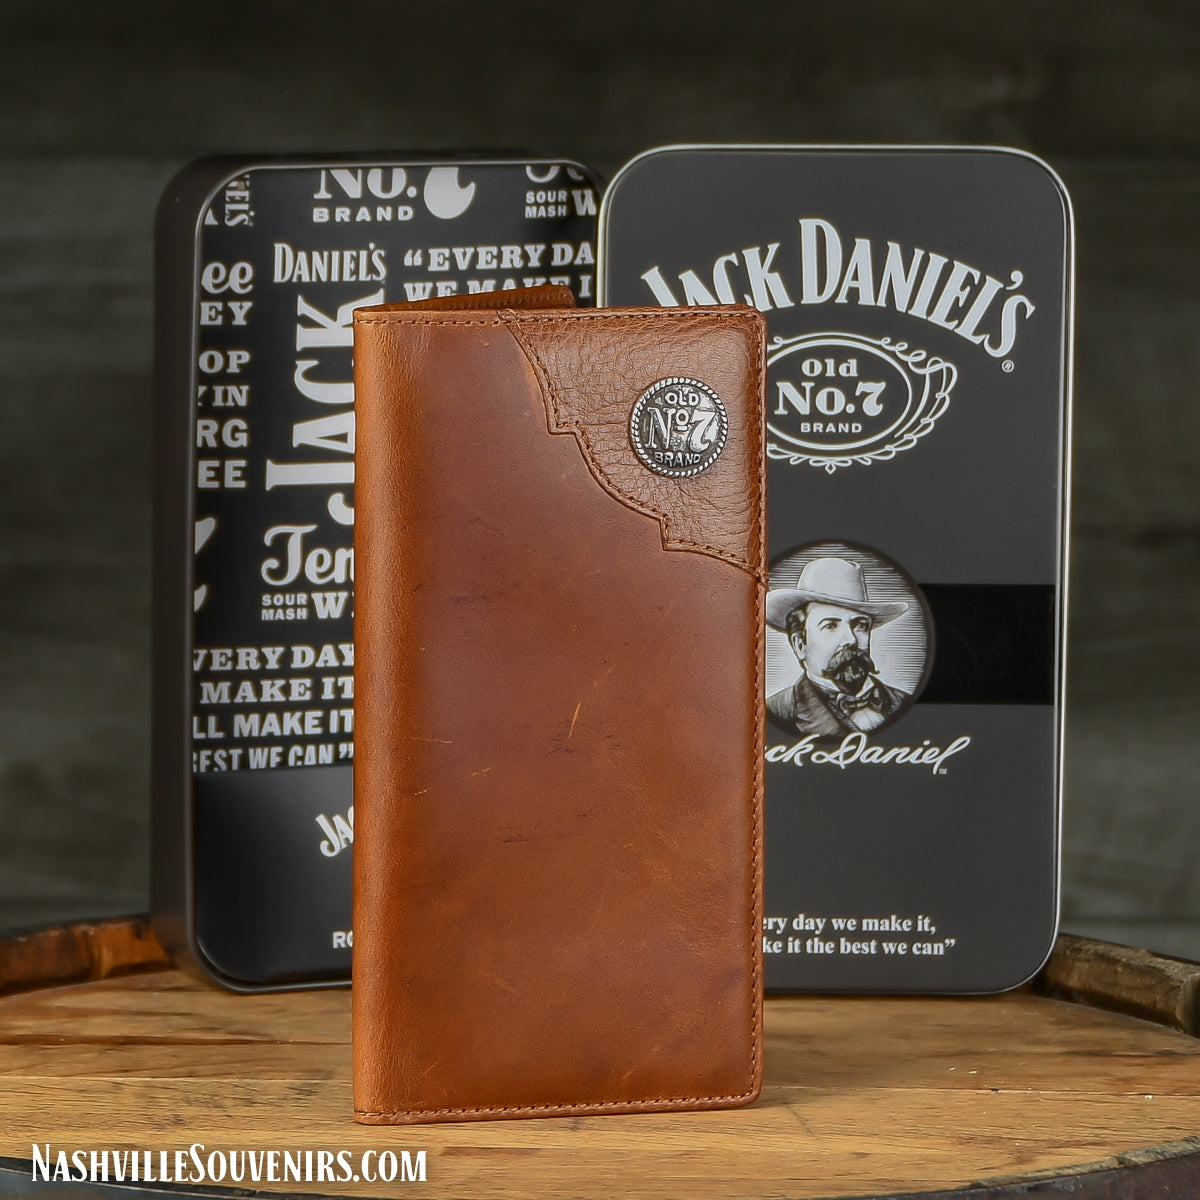 Natural Leather Jack Daniels Rodeo Wallet with Old No.7 Medallion